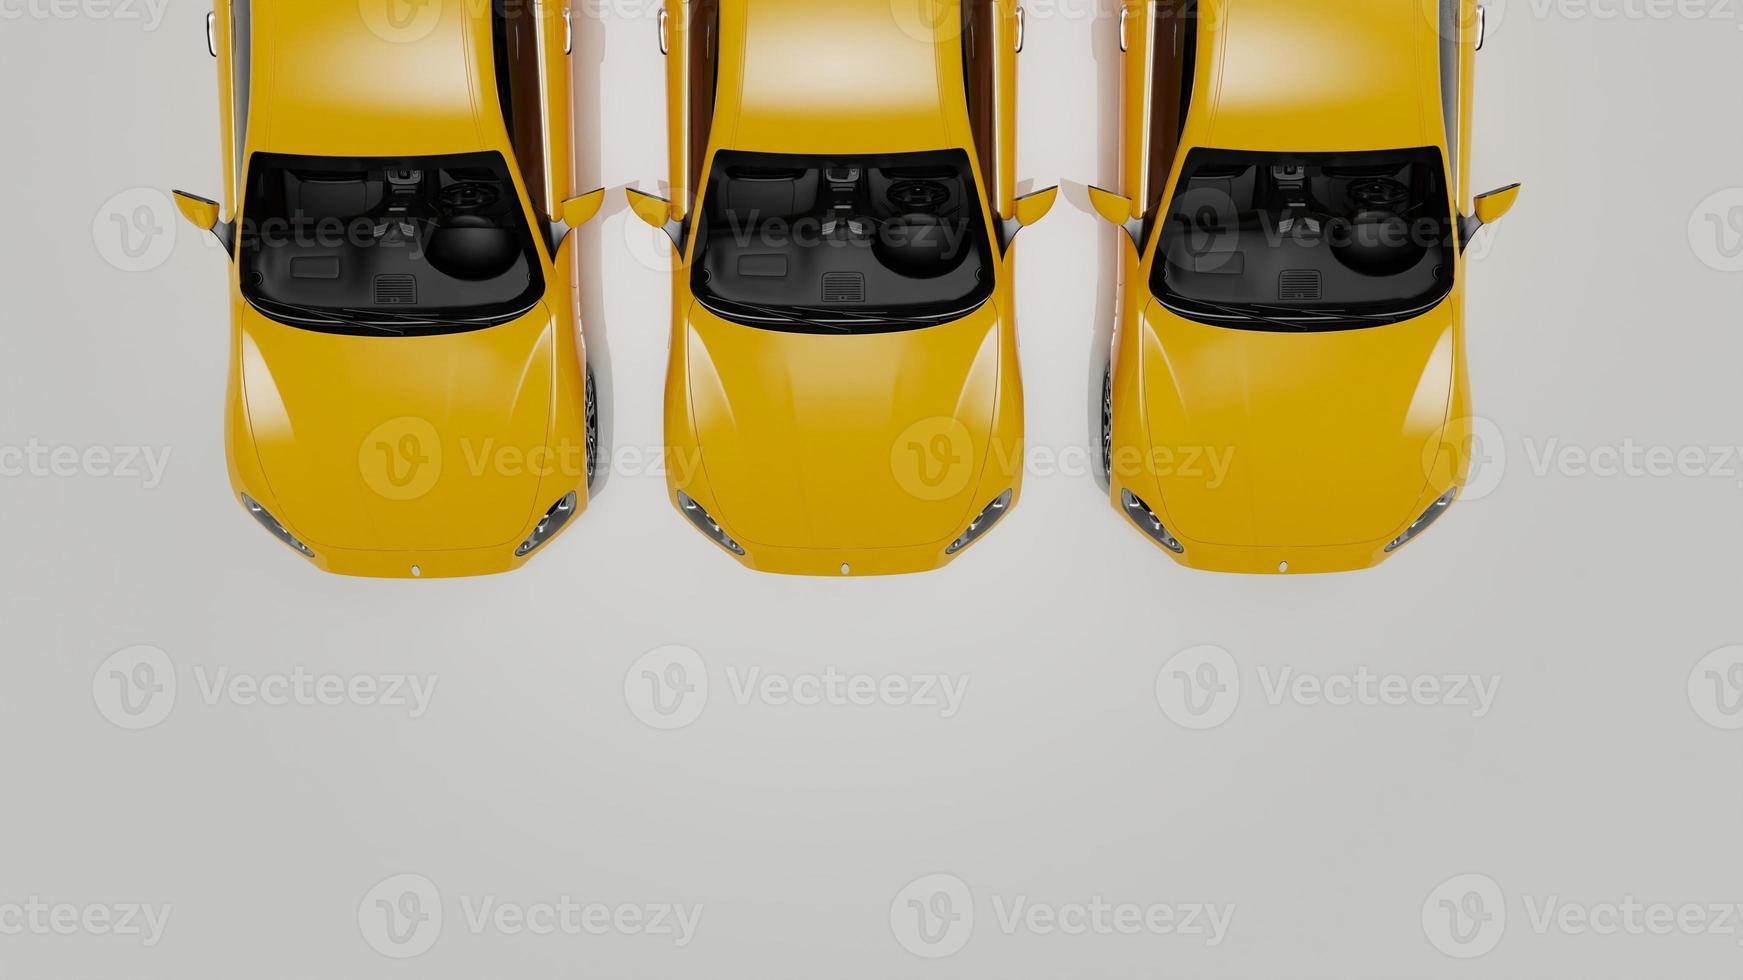 auto yellow. 3d illustration of fragments of vehicles on a blue uniform background. photo